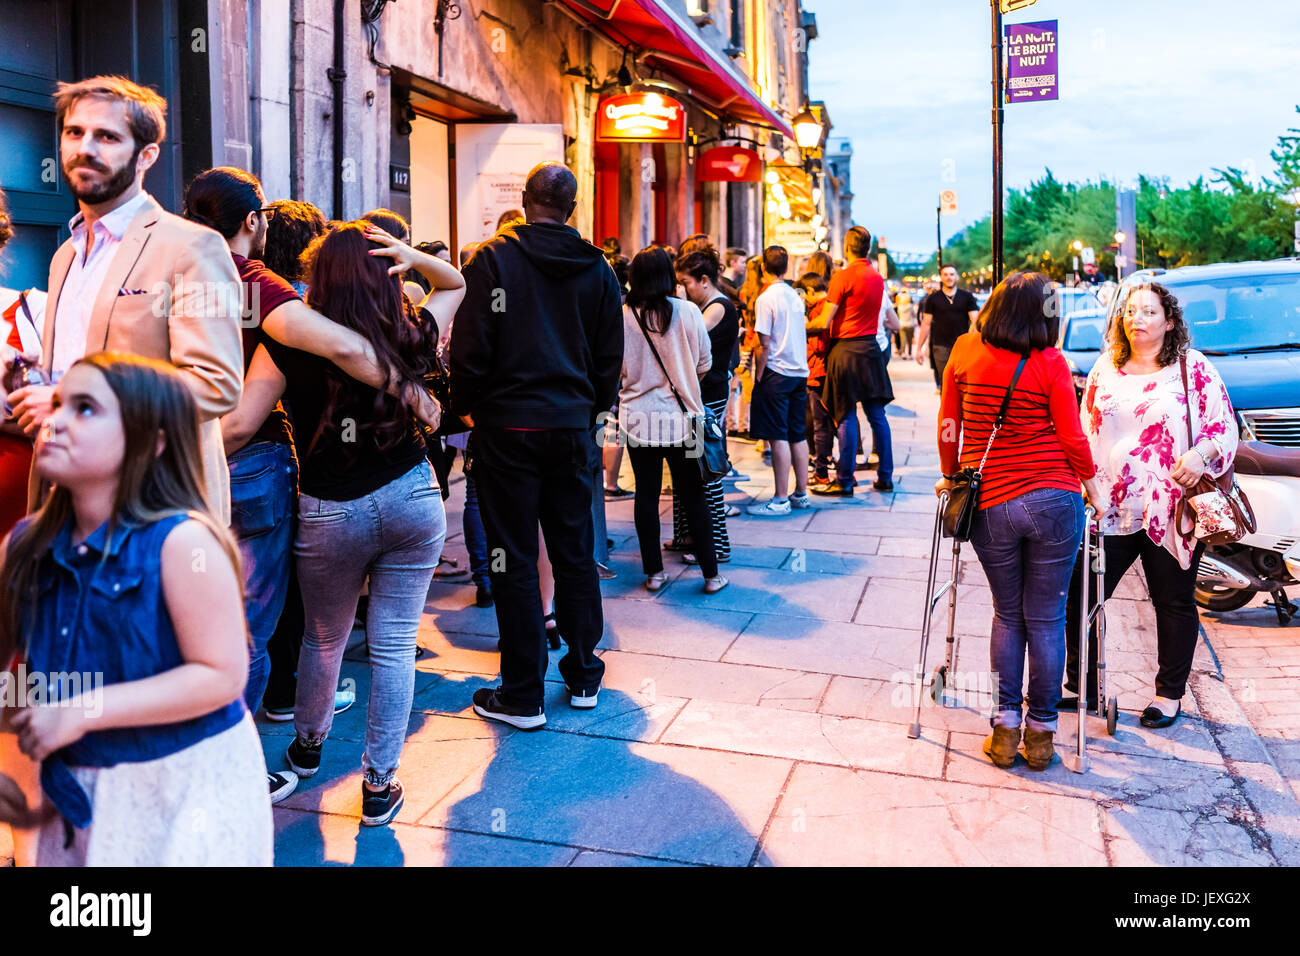 Montreal, Canada - May 27, 2017: Old town area with people waiting in line queue outside restaurant during evening night in Quebec region city Stock Photo